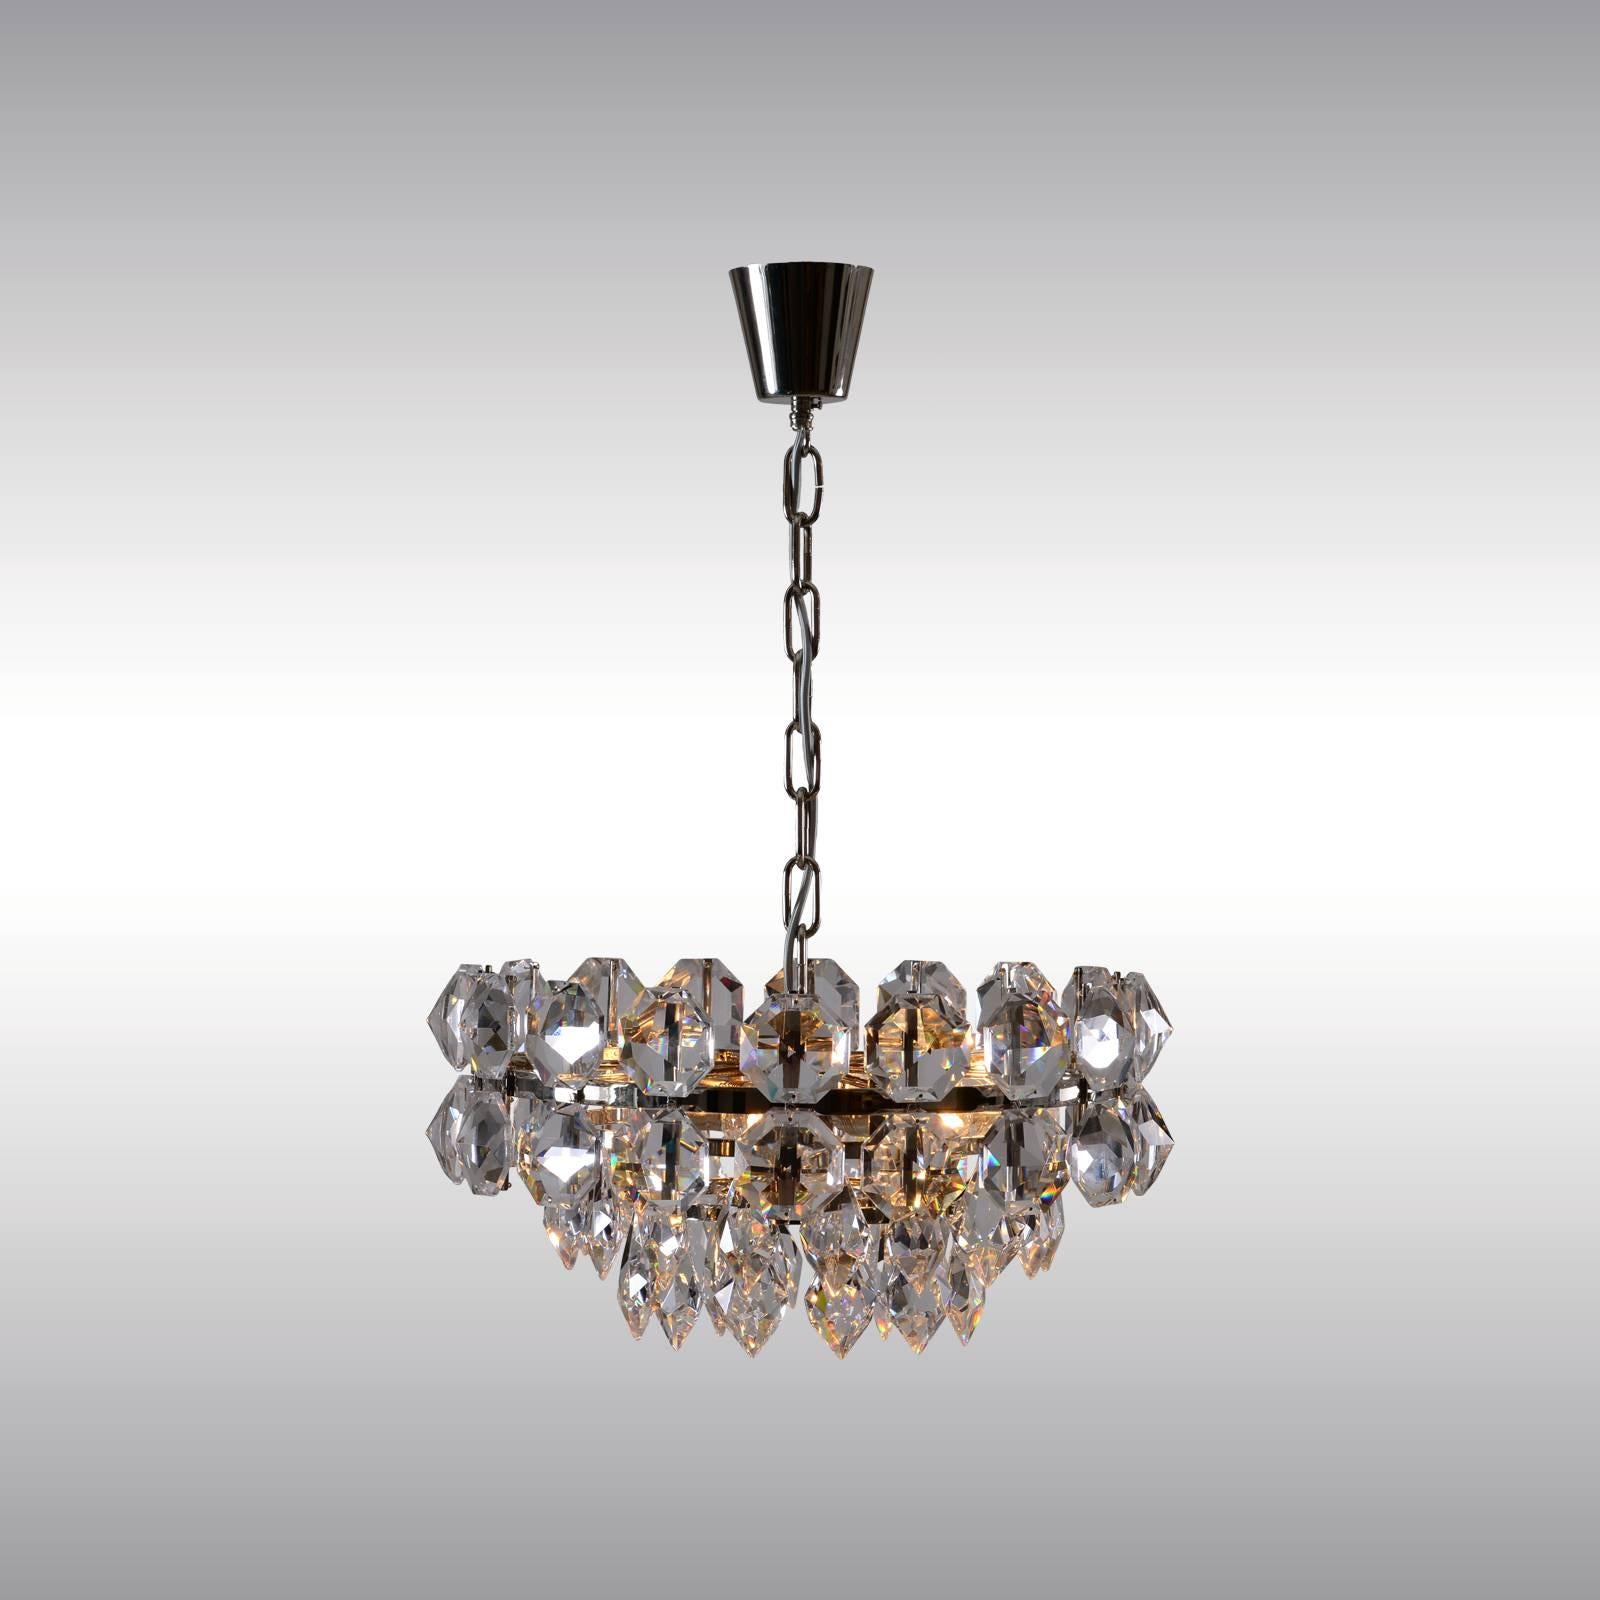 Hand-Crafted Mid-Century Modern Style Very Big Crystal-Glass Stone Chandelier, Re-Edition For Sale